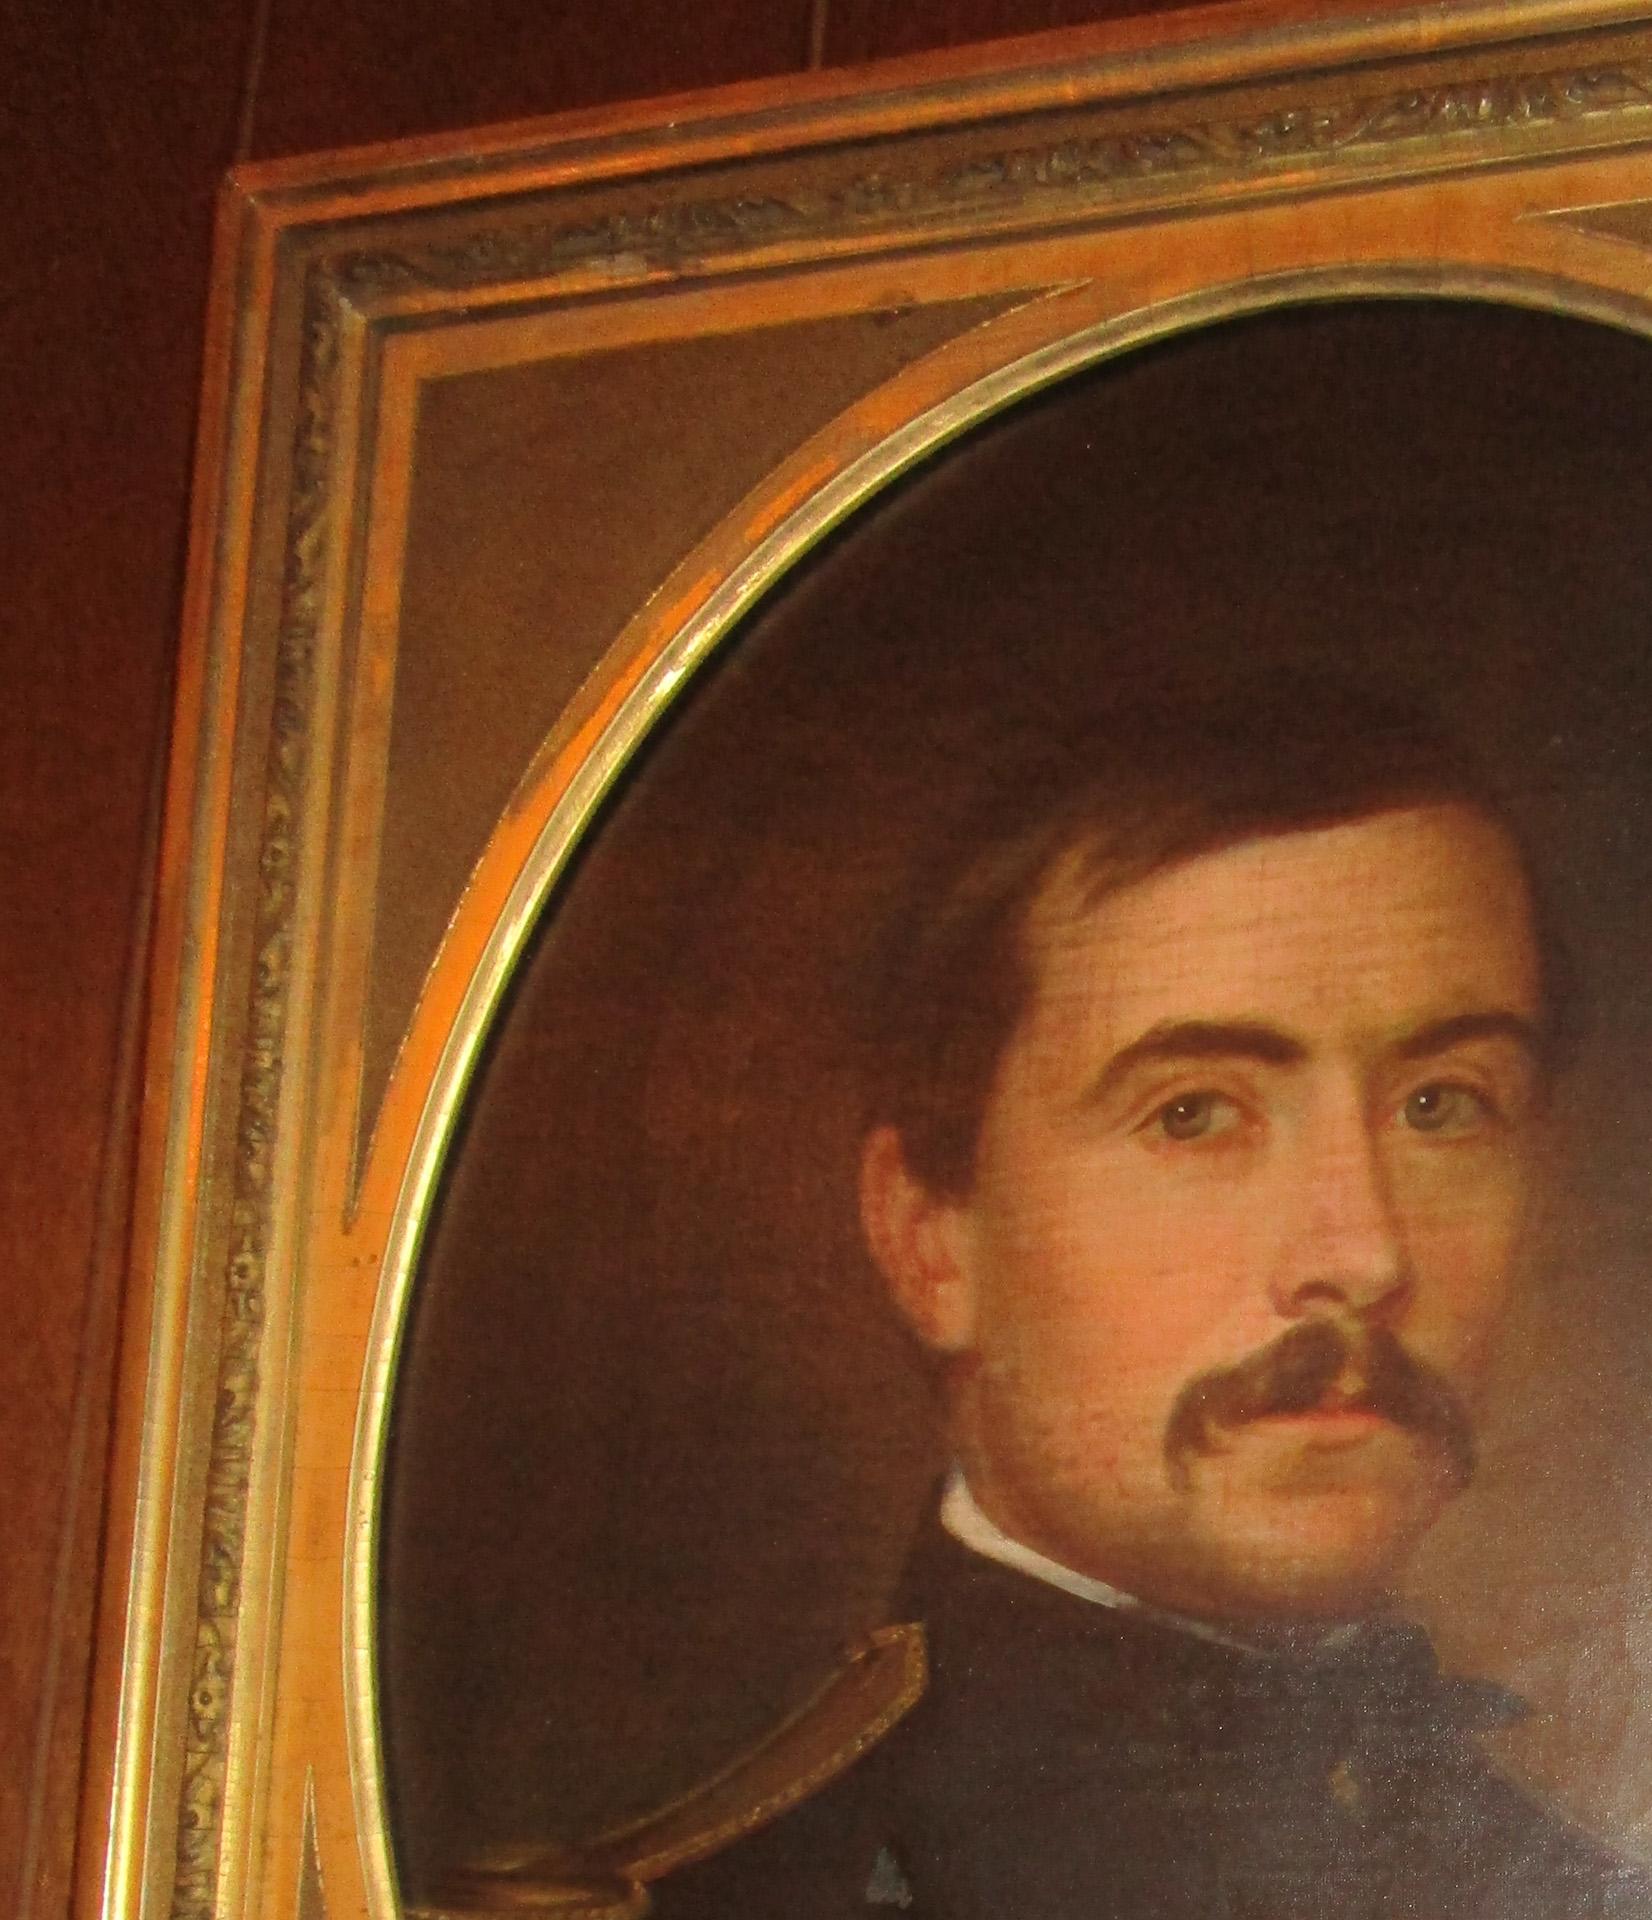 Mid-19th Century 19th century American Civil War Union Army Officer Framed Portrait Oil on Canvas